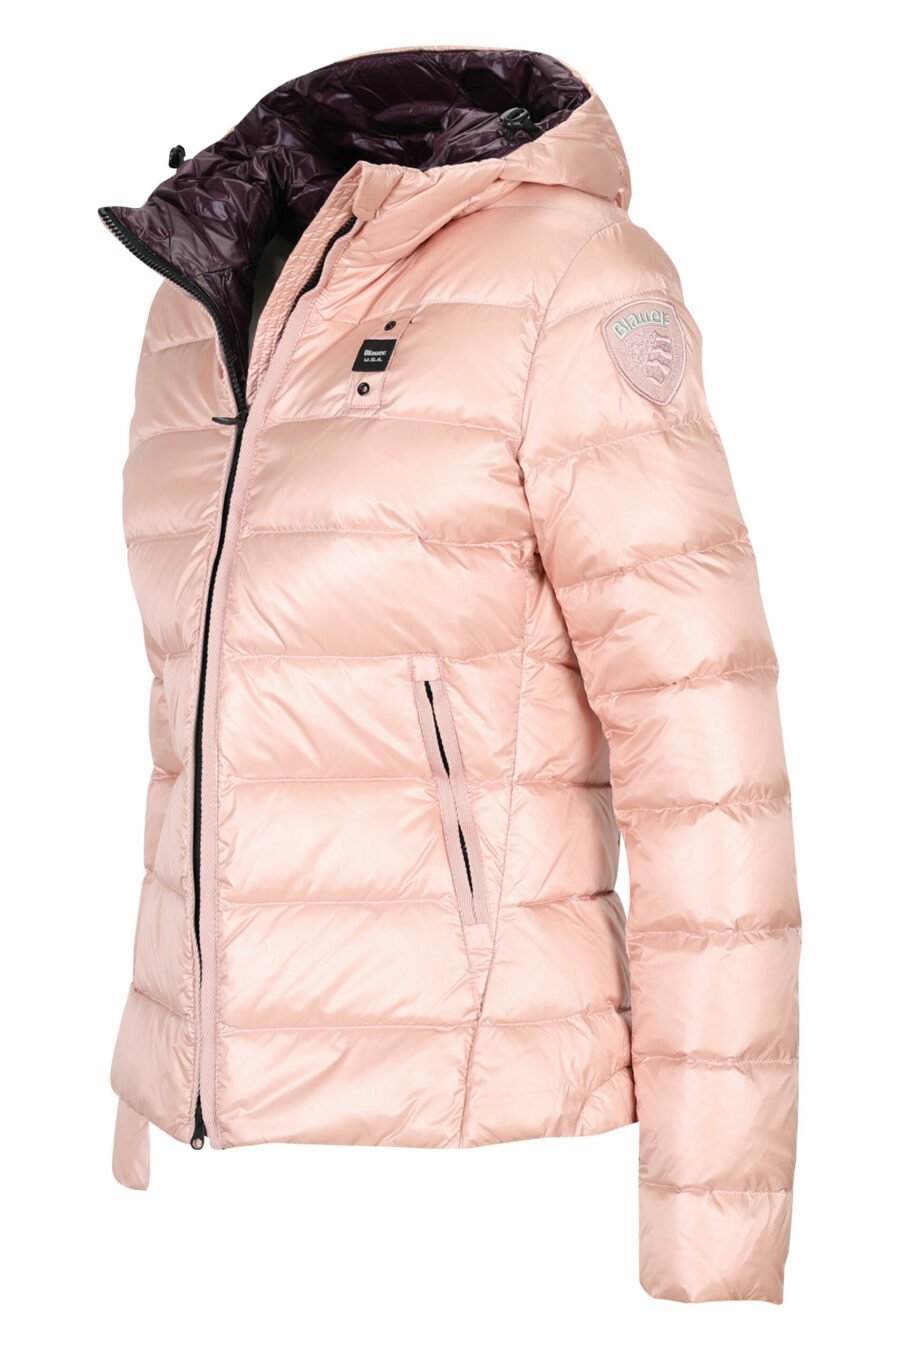 Pale pink hooded jacket with straight lines with purple inside and logo patch - 8058610673321 2 scaled